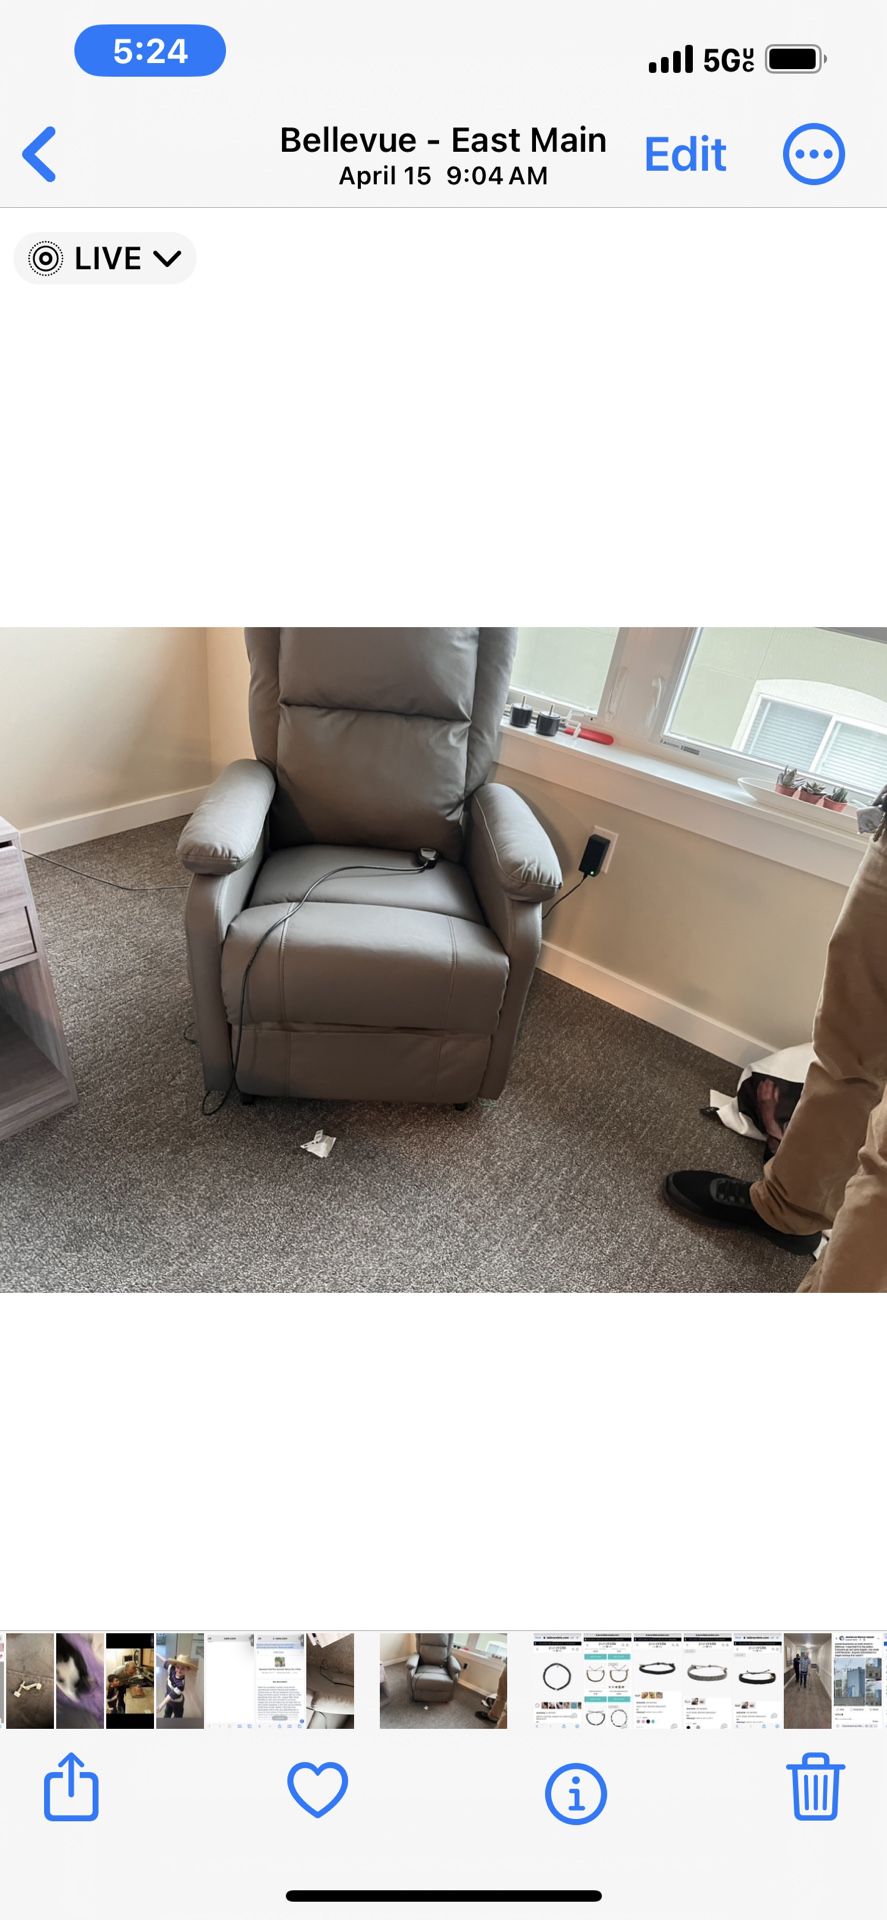 Power Lift Recliner For Sale New